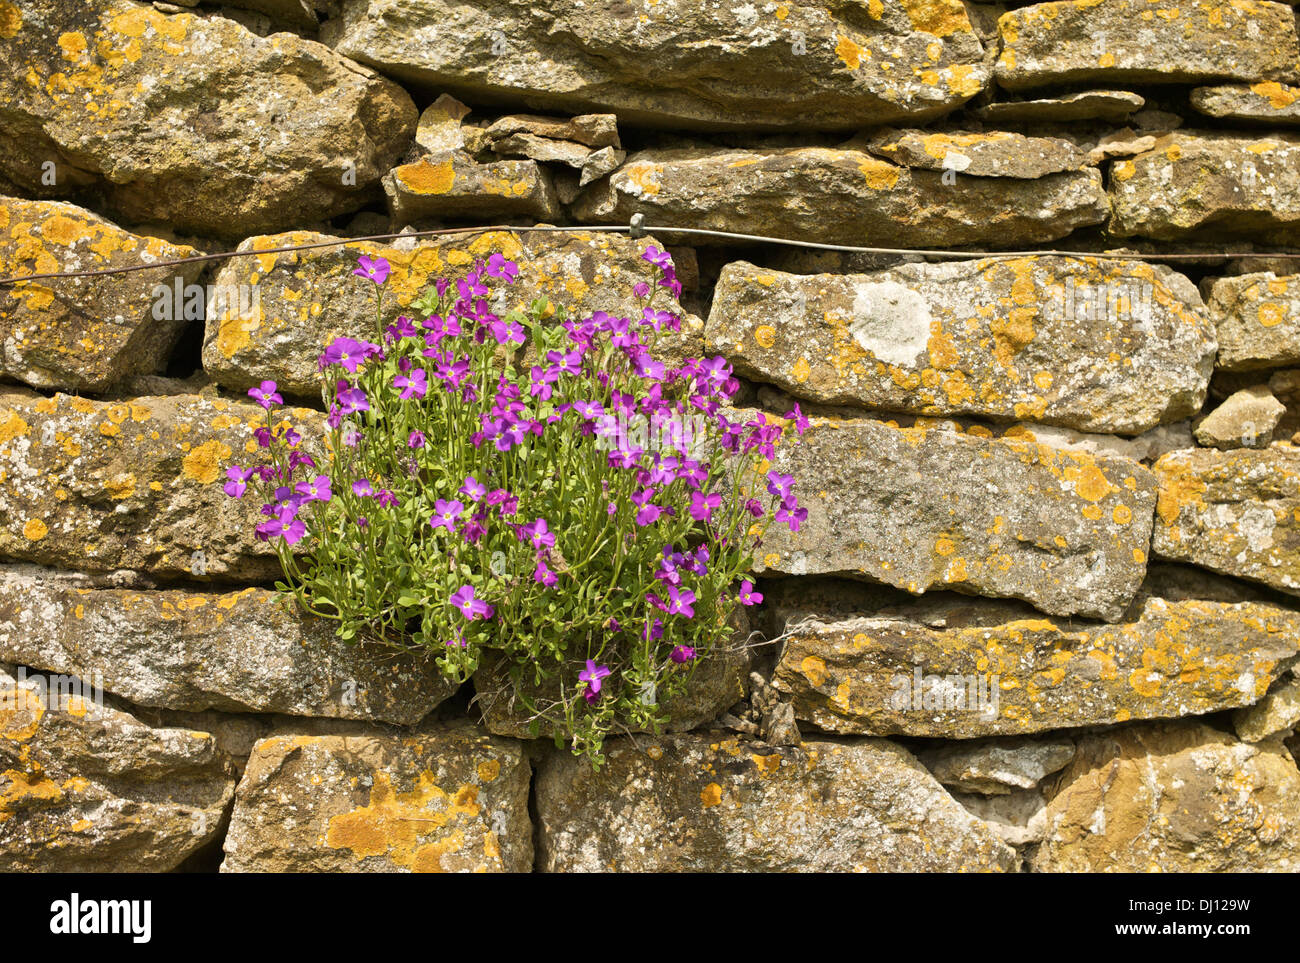 Closeup details of drystone walling with purple coloured flowers ...